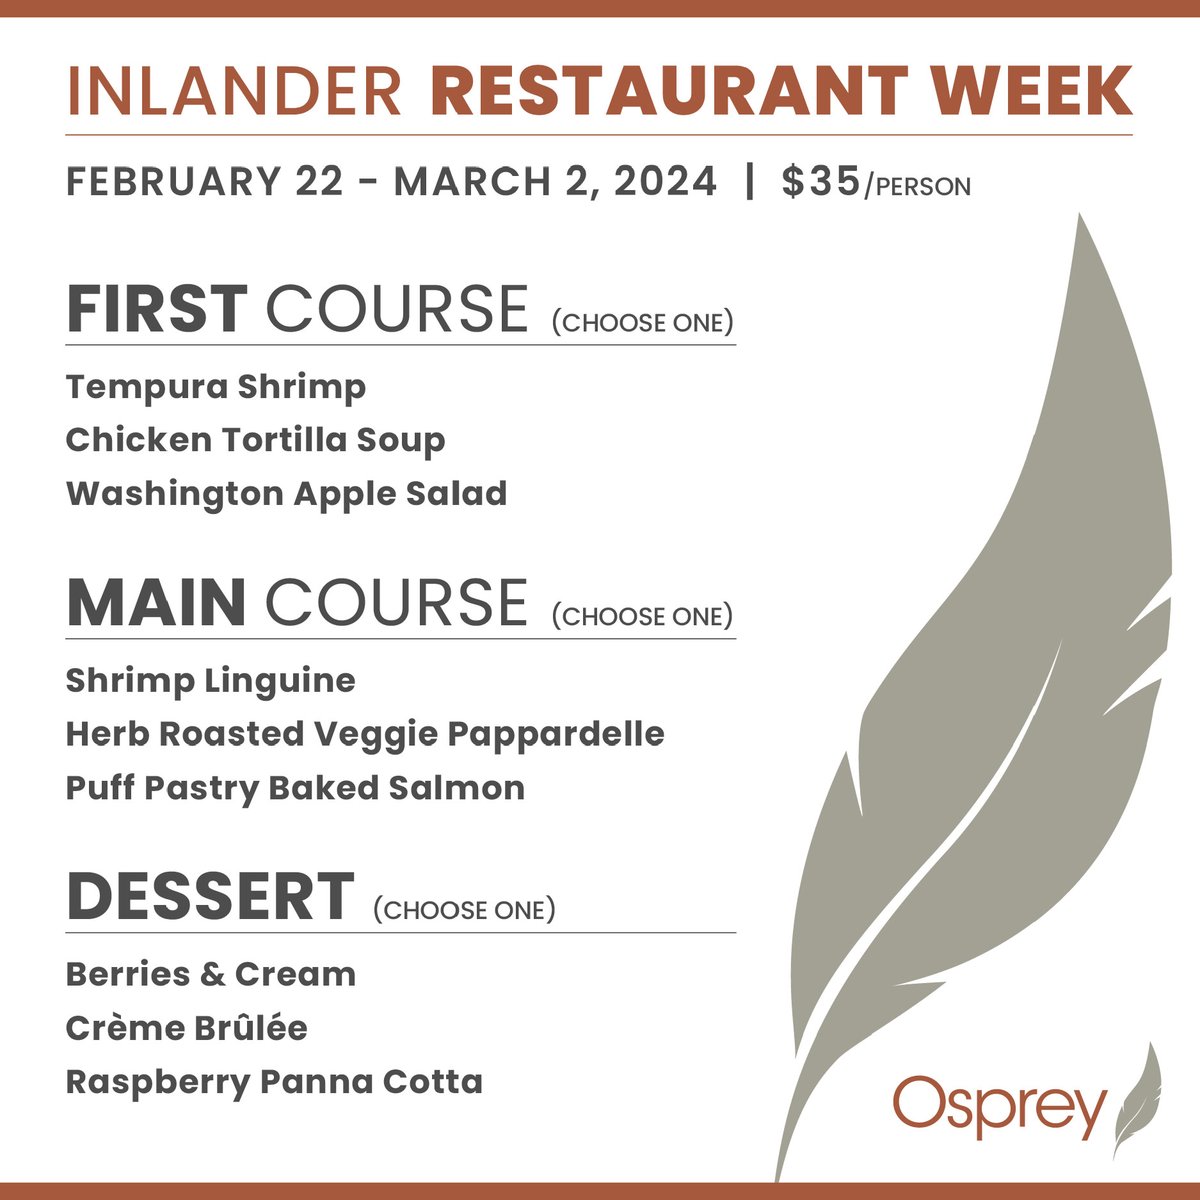 Another delectable looking Restaurant Week menu! Osprey Restaurant & Bar is just outside the core downtown area, with gorgeous views of the Spokane River. Check them out! #ospreyspokane #spokanefoodie #spokaneeats #inlanderrestaurantweek